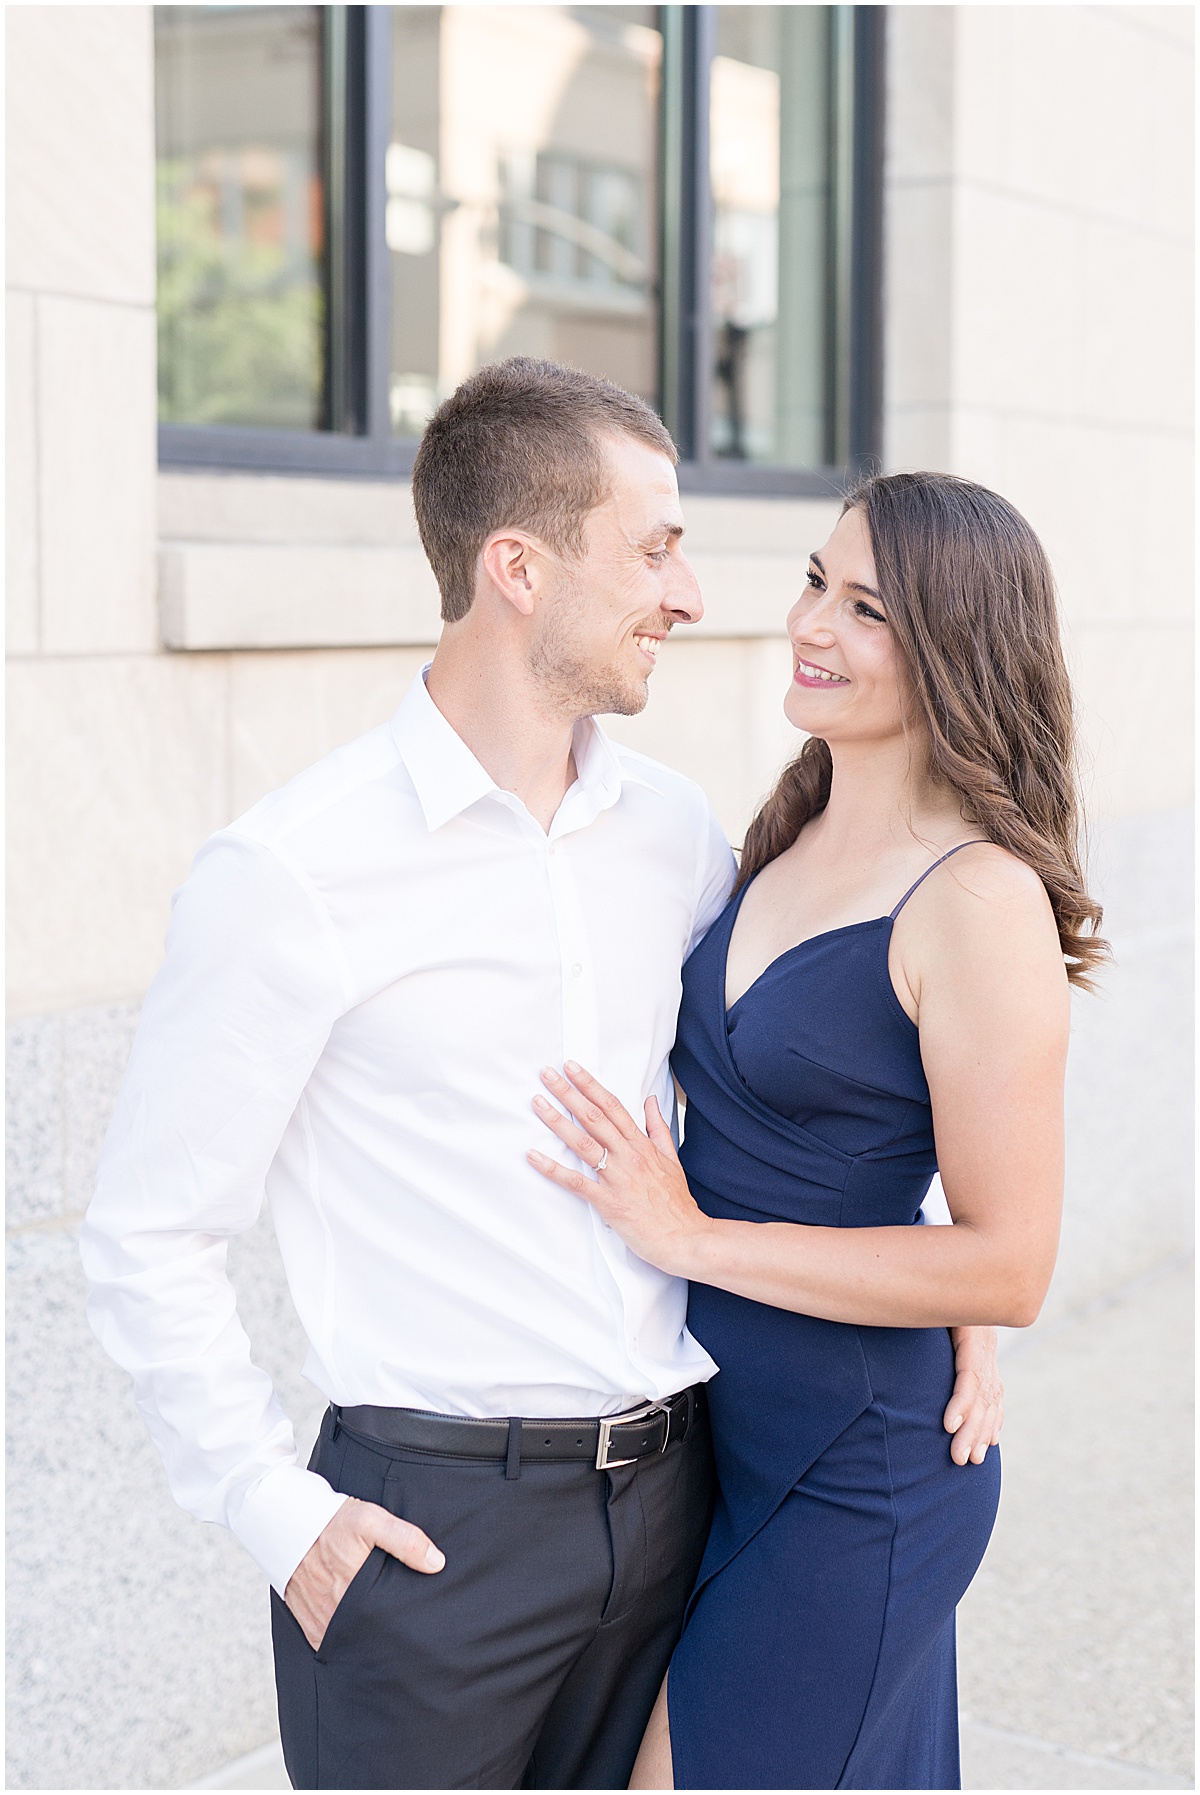 Downtown Lafayette, Indiana engagement photos by Victoria Rayburn Photography